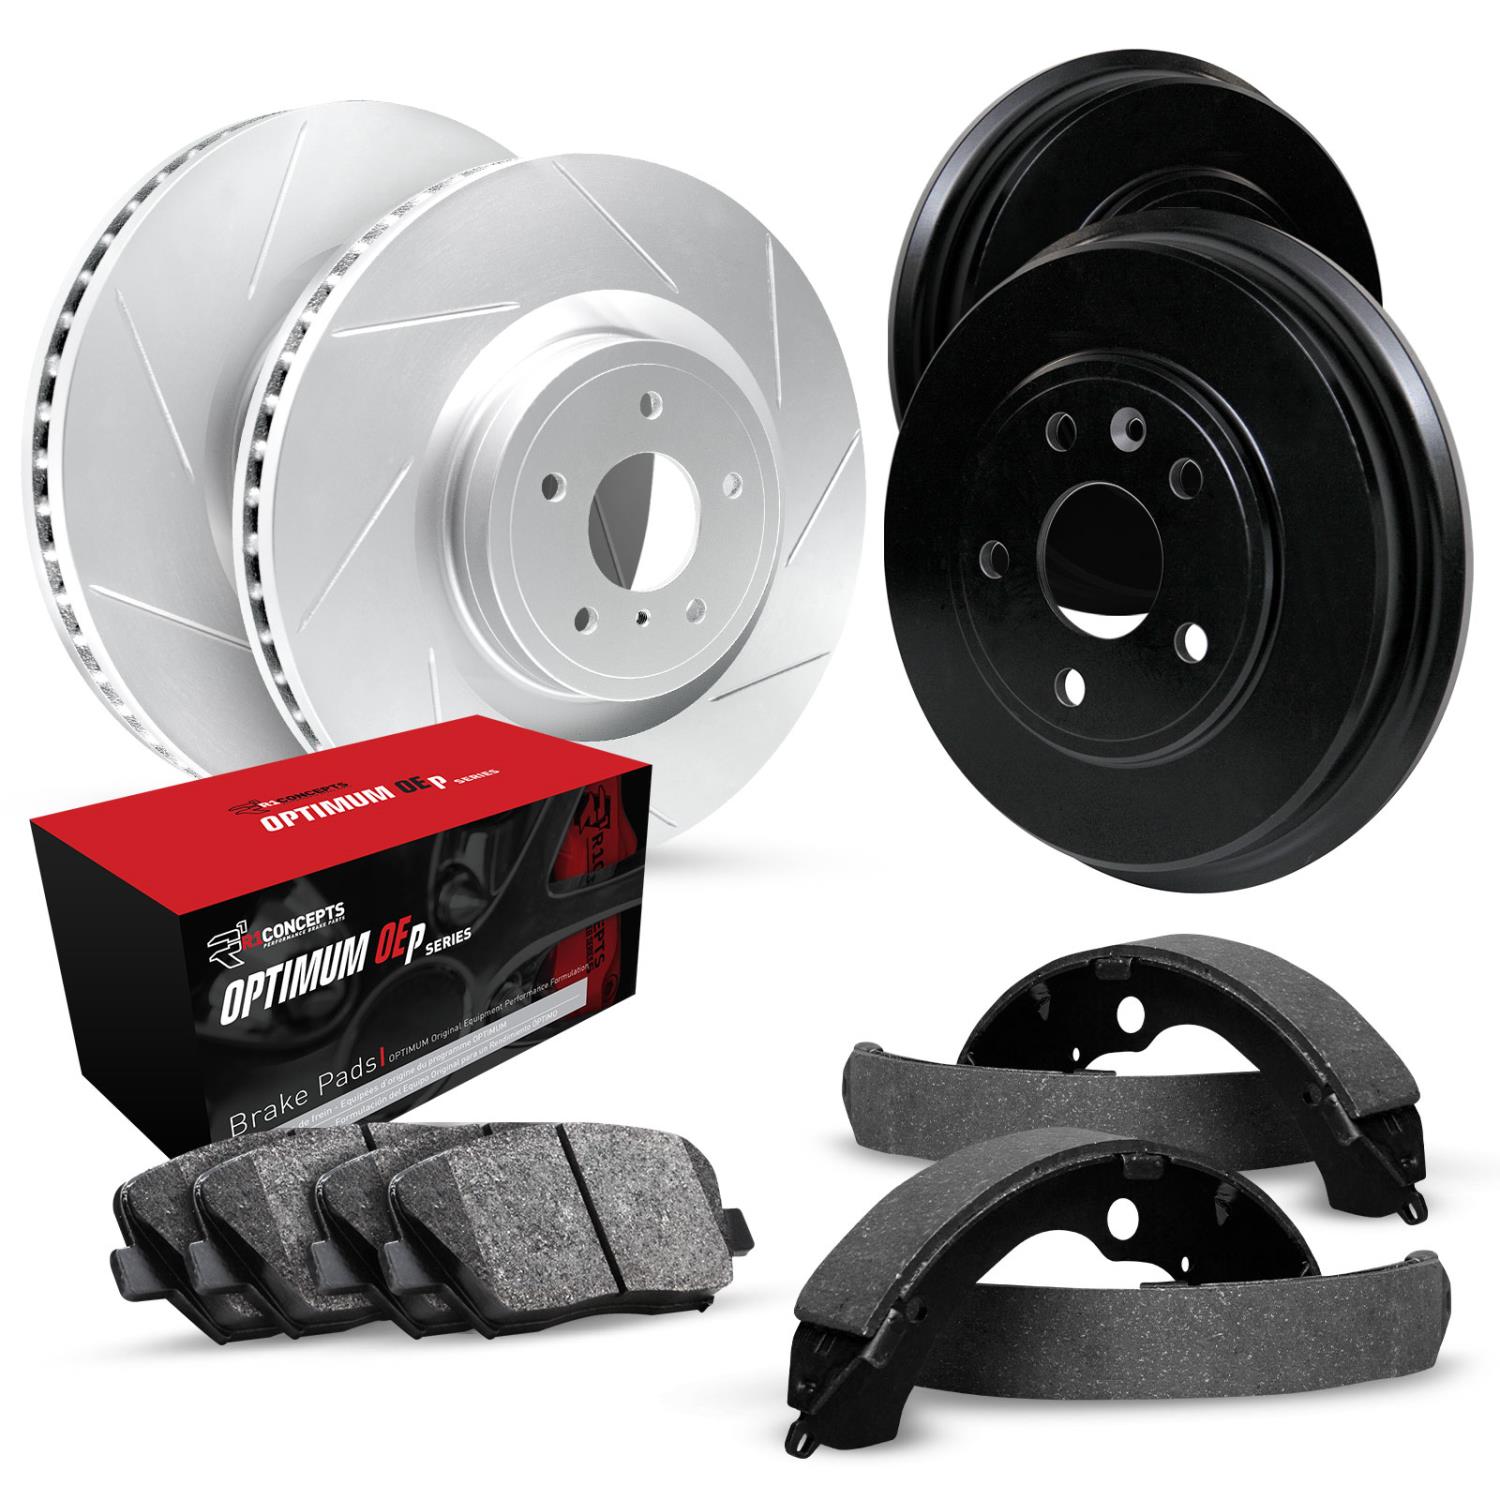 GEO-Carbon Slotted Brake Rotor & Drum Set w/Optimum OE Pads & Shoes, 1997-2000 Ford/Lincoln/Mercury/Mazda